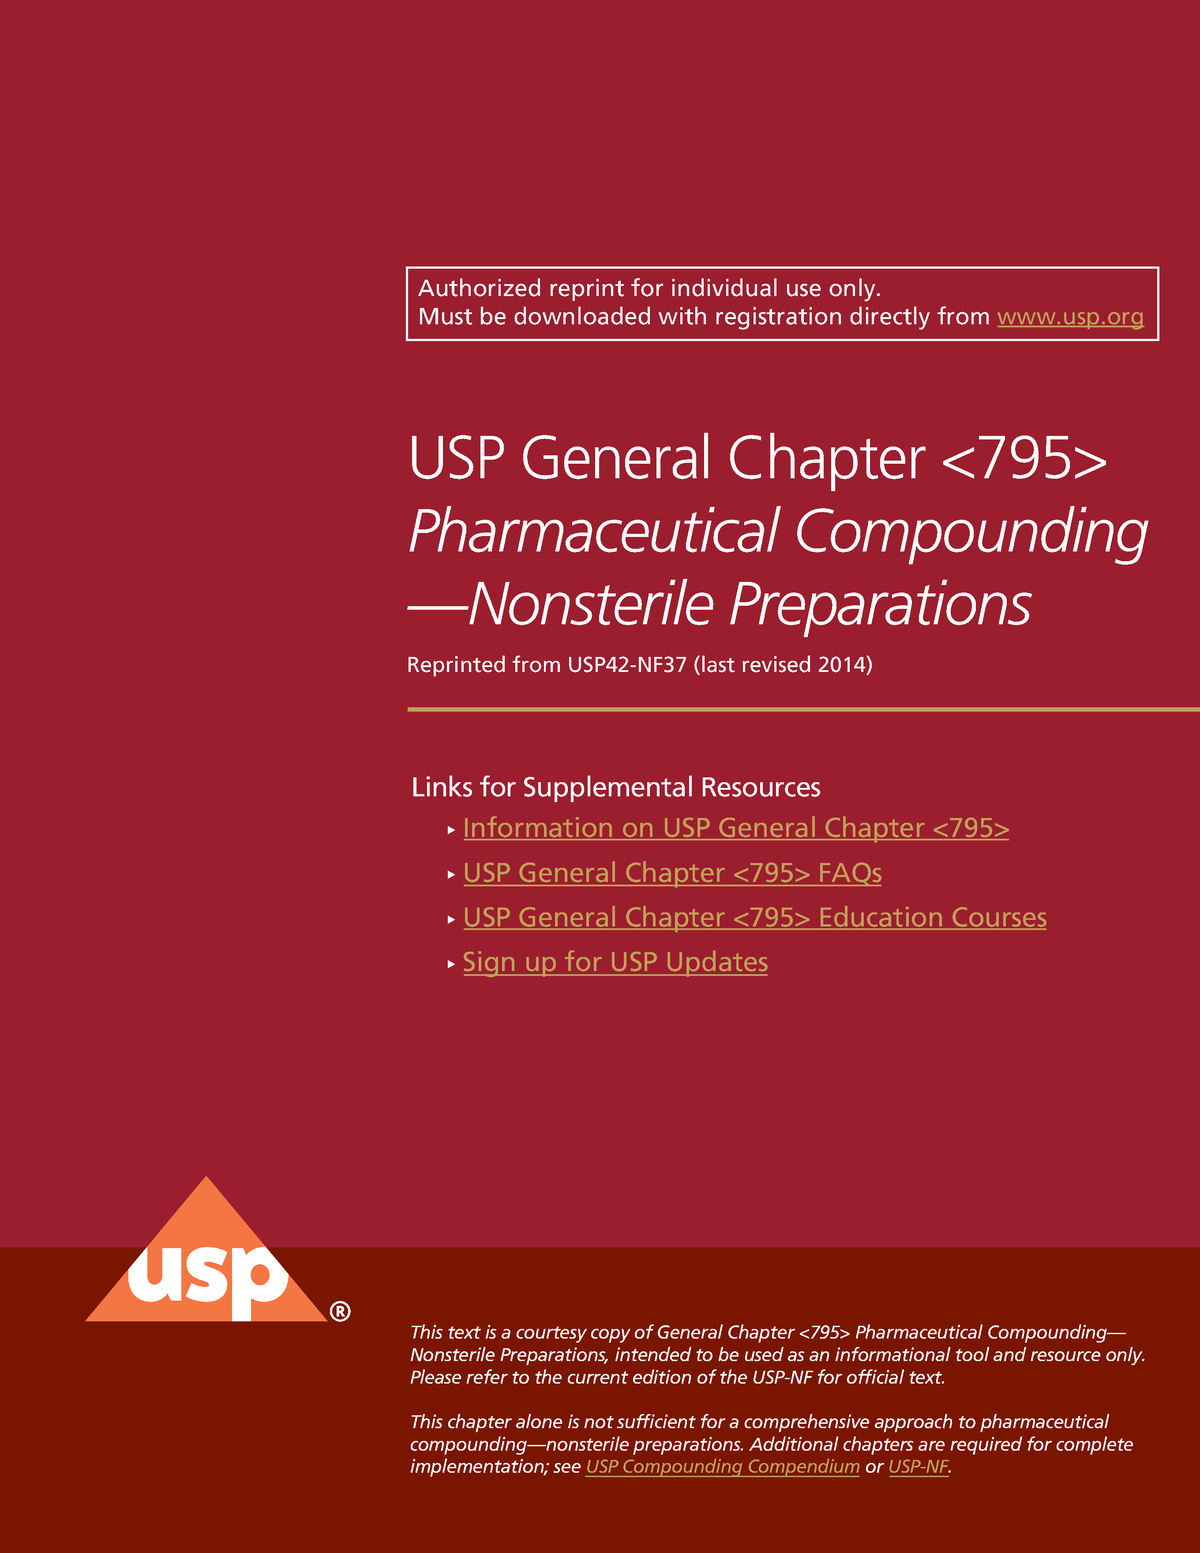 USP GC General Chapter 795 Official last revised 2014 Information on